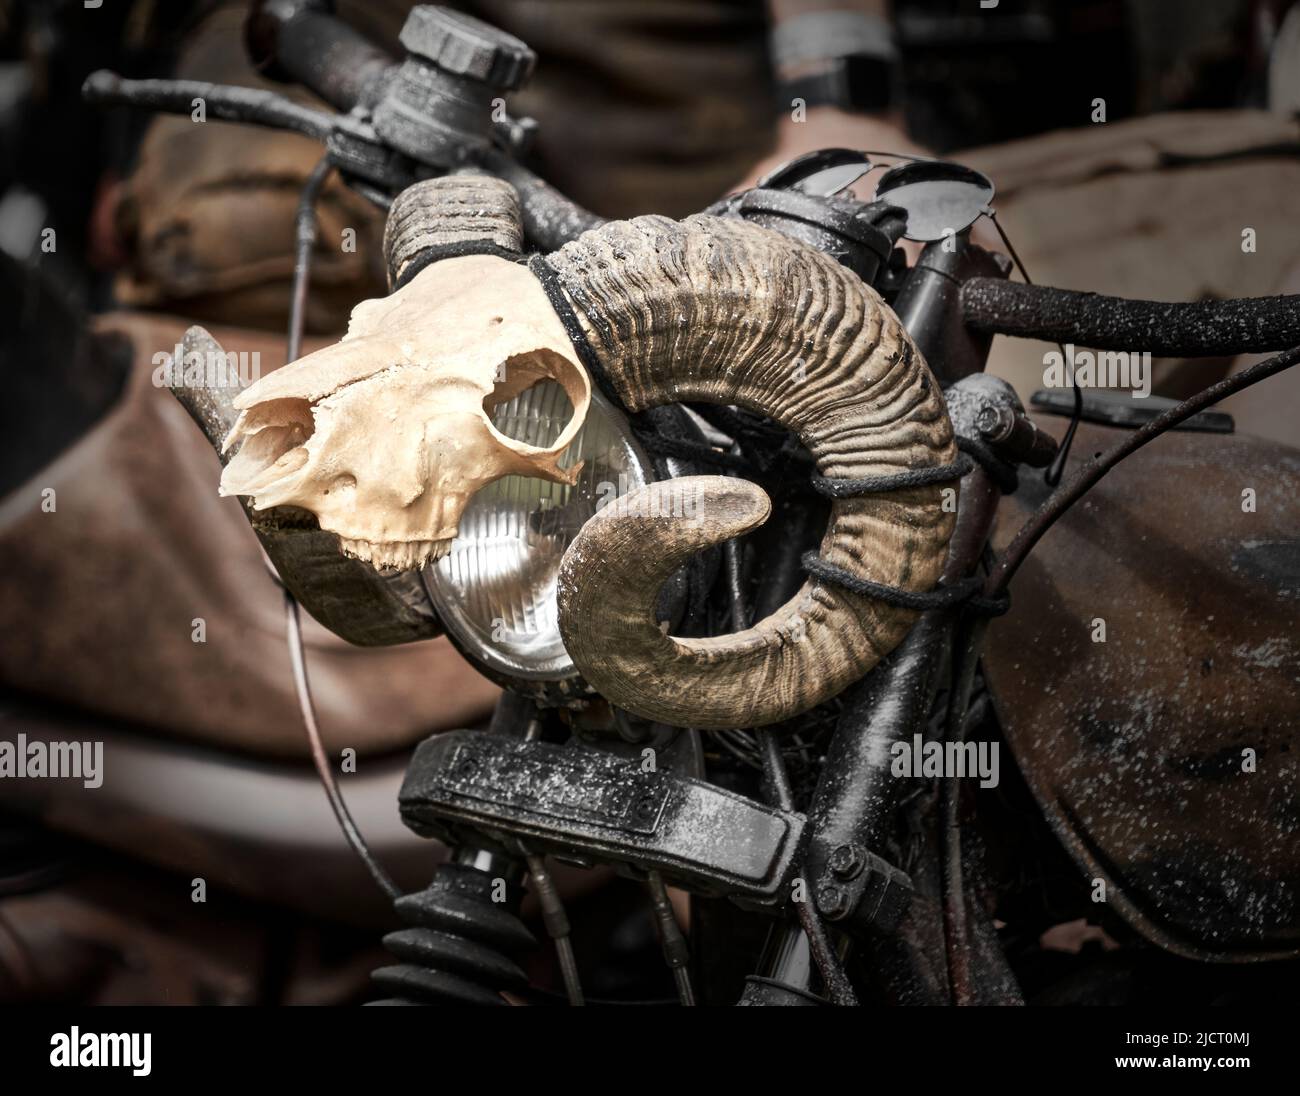 Skeleton of the upper jaw, forehead and horns of a ram as a decoration on the handlebars of a rusty motorcycle Stock Photo